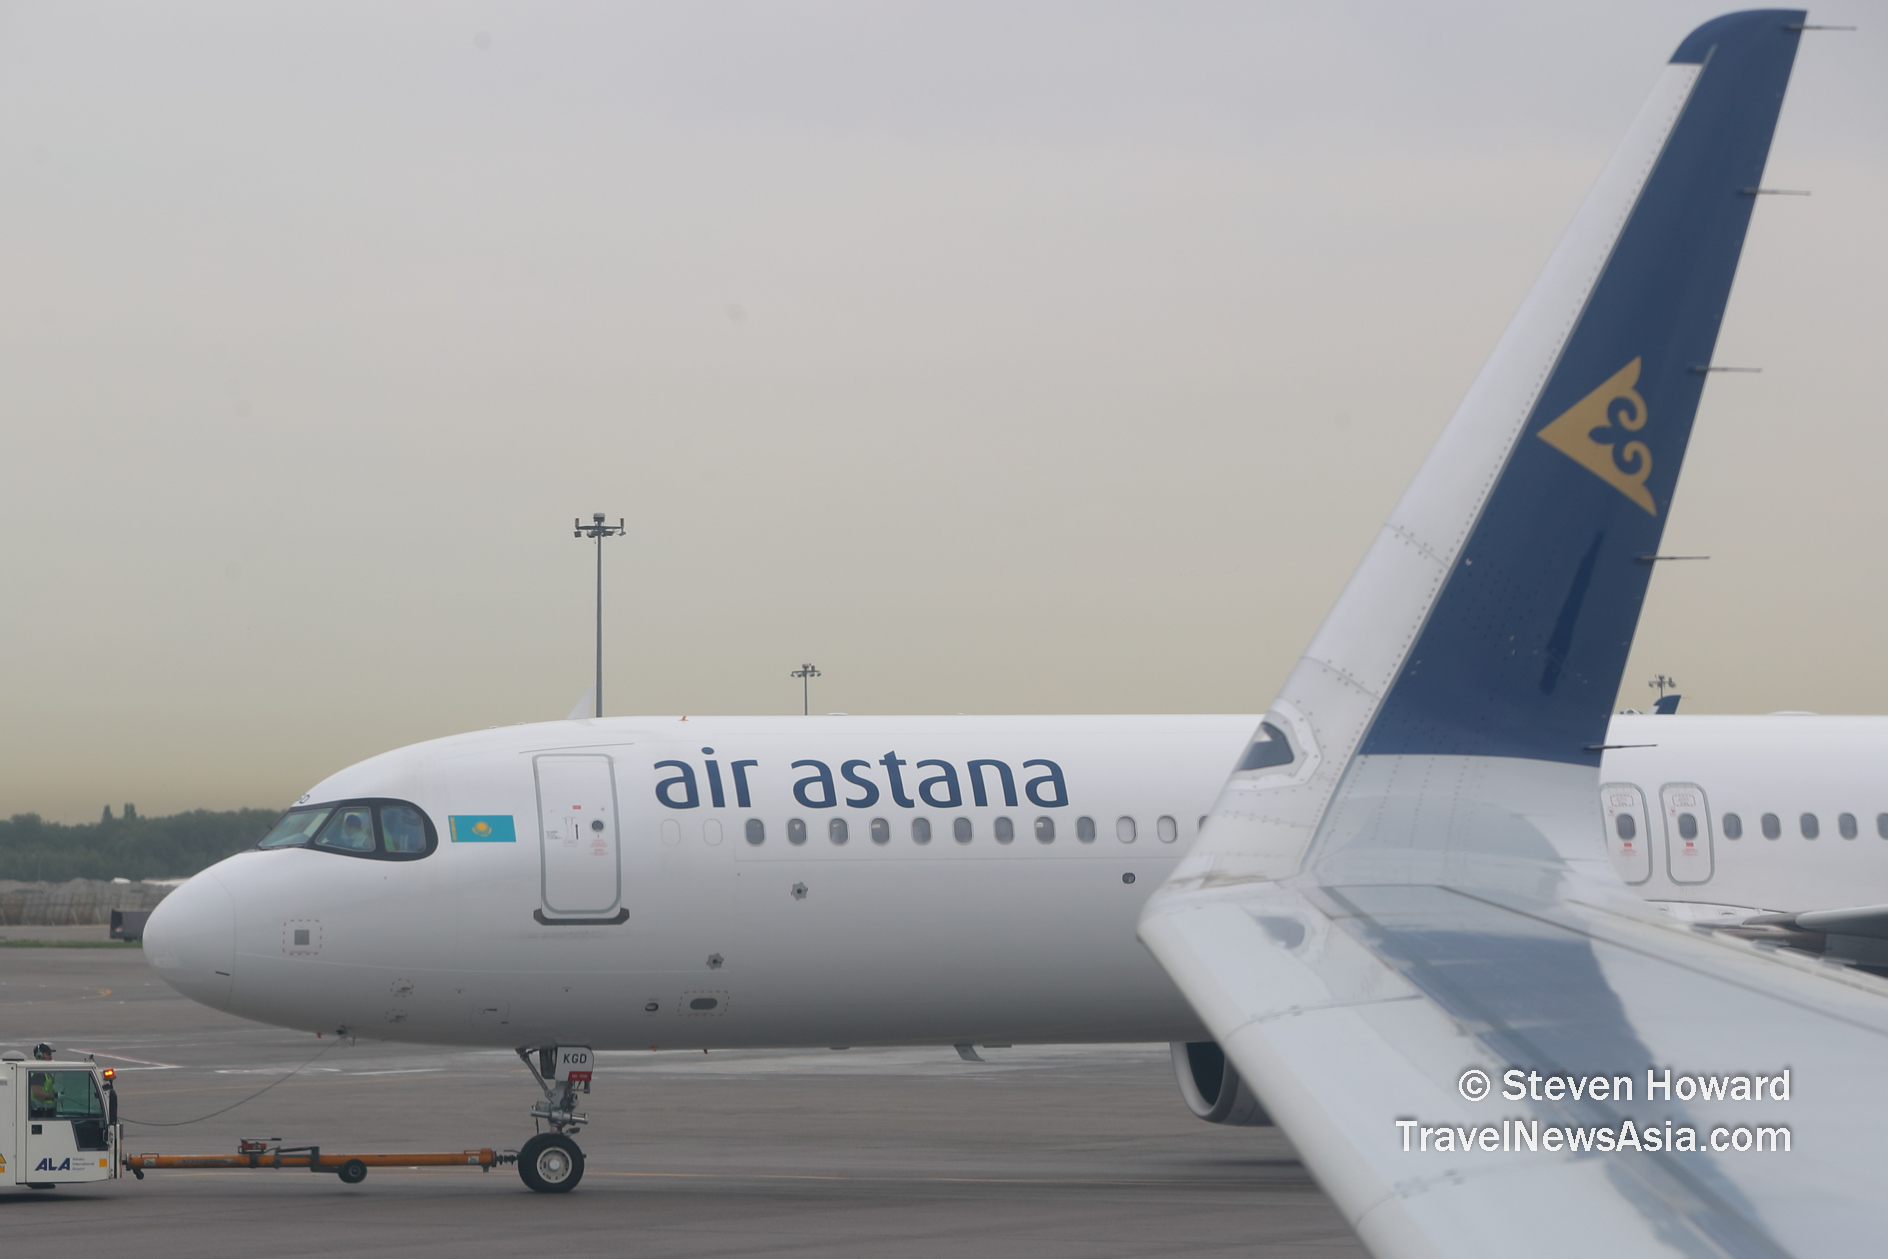 Air Astana aircraft at Almaty Airport (ALA). Picture by Steven Howard of TravelNewsAsia.com Click to enlarge.